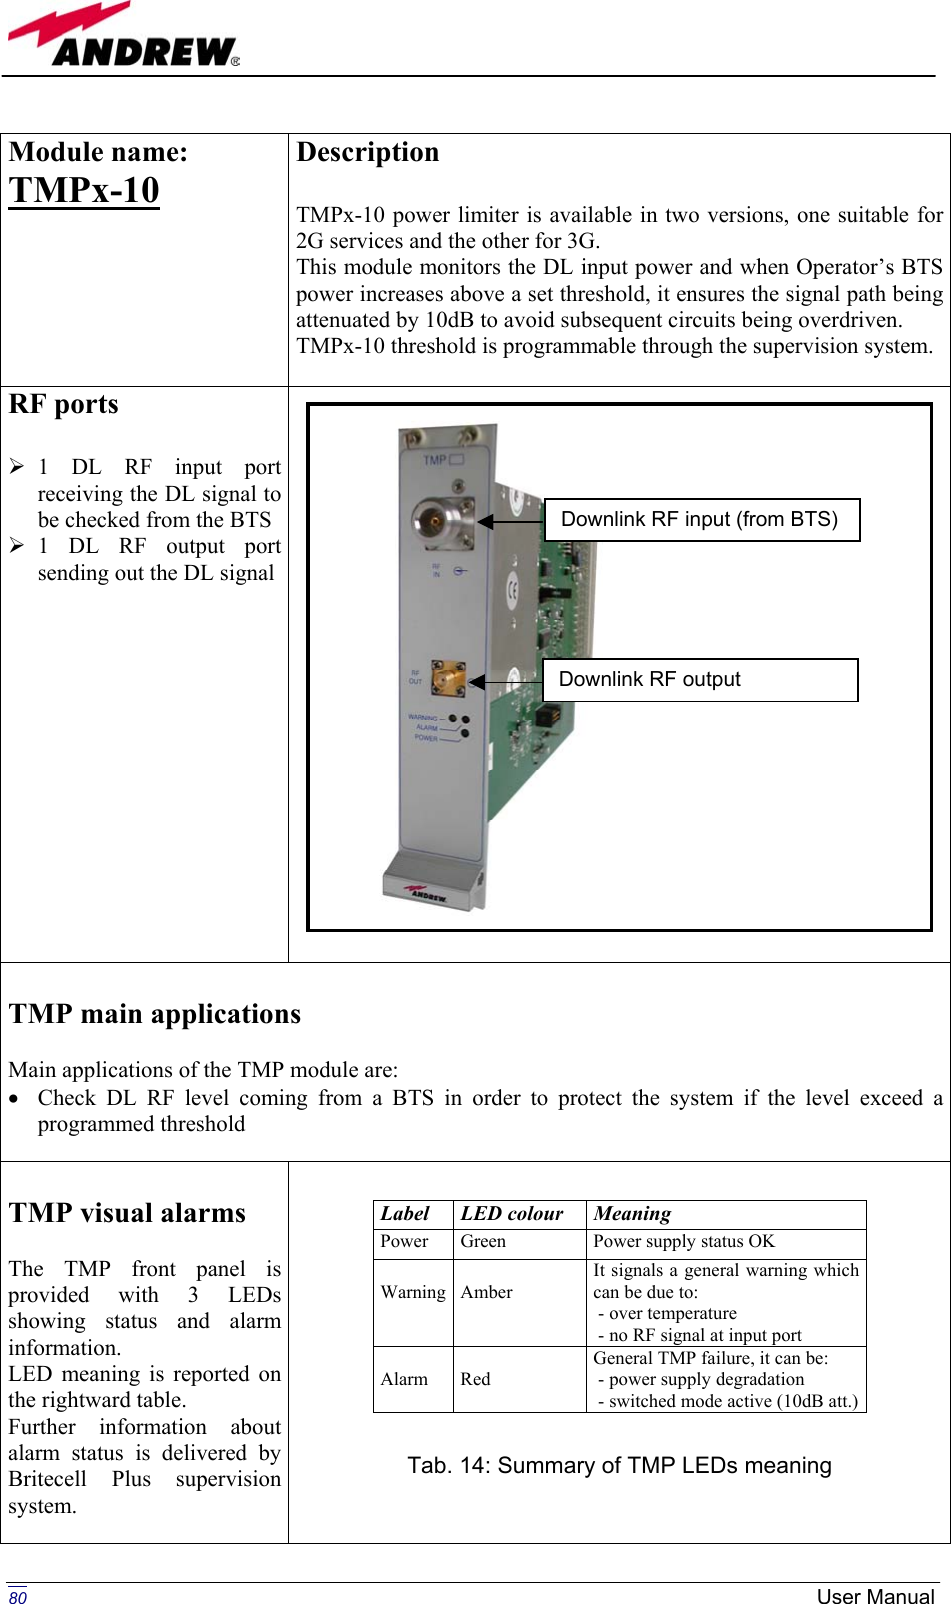  Module name: TMPx-10   Description  TMPx-10 power limiter is available in two versions, one suitable for 2G services and the other for 3G. This module monitors the DL input power and when Operator’s BTS power increases above a set threshold, it ensures the signal path being attenuated by 10dB to avoid subsequent circuits being overdriven. TMPx-10 threshold is programmable through the supervision system.  RF ports   1 DL RF input port receiving the DL signal to be checked from the BTS  1 DL RF output port sending out the DL signal                 TMP main applications  Main applications of the TMP module are: •  Check DL RF level coming from a BTS in order to protect the system if the level exceed a programmed threshold   TMP visual alarms  The TMP front panel is provided with 3 LEDs  showing status and alarm information. LED meaning is reported on the rightward table. Further information about alarm status is delivered by Britecell Plus supervision system.   Label LED colour Meaning Power  Green  Power supply status OK  Warning  Amber It signals a general warning which can be due to:  - over temperature  - no RF signal at input port  Alarm  Red General TMP failure, it can be:  - power supply degradation  - switched mode active (10dB att.) Tab. 14: Summary of TMP LEDs meaning Downlink RF output Downlink RF input (from BTS)  80 User Manual